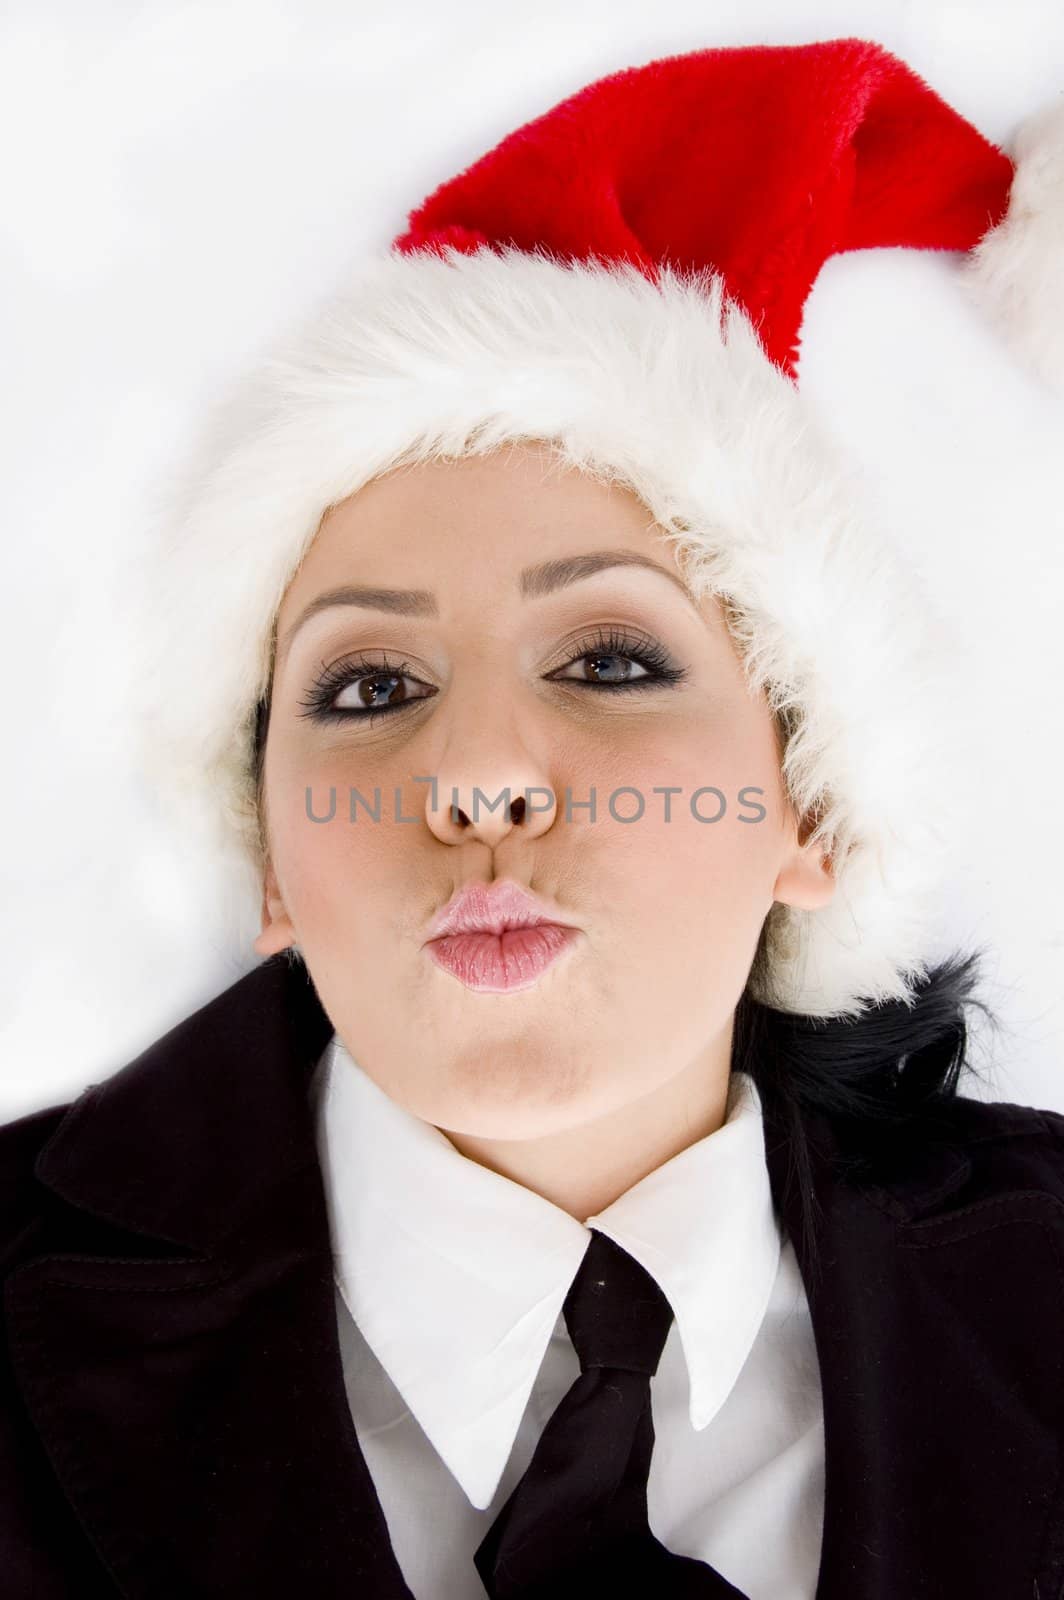 manager wearing christmas hat by imagerymajestic